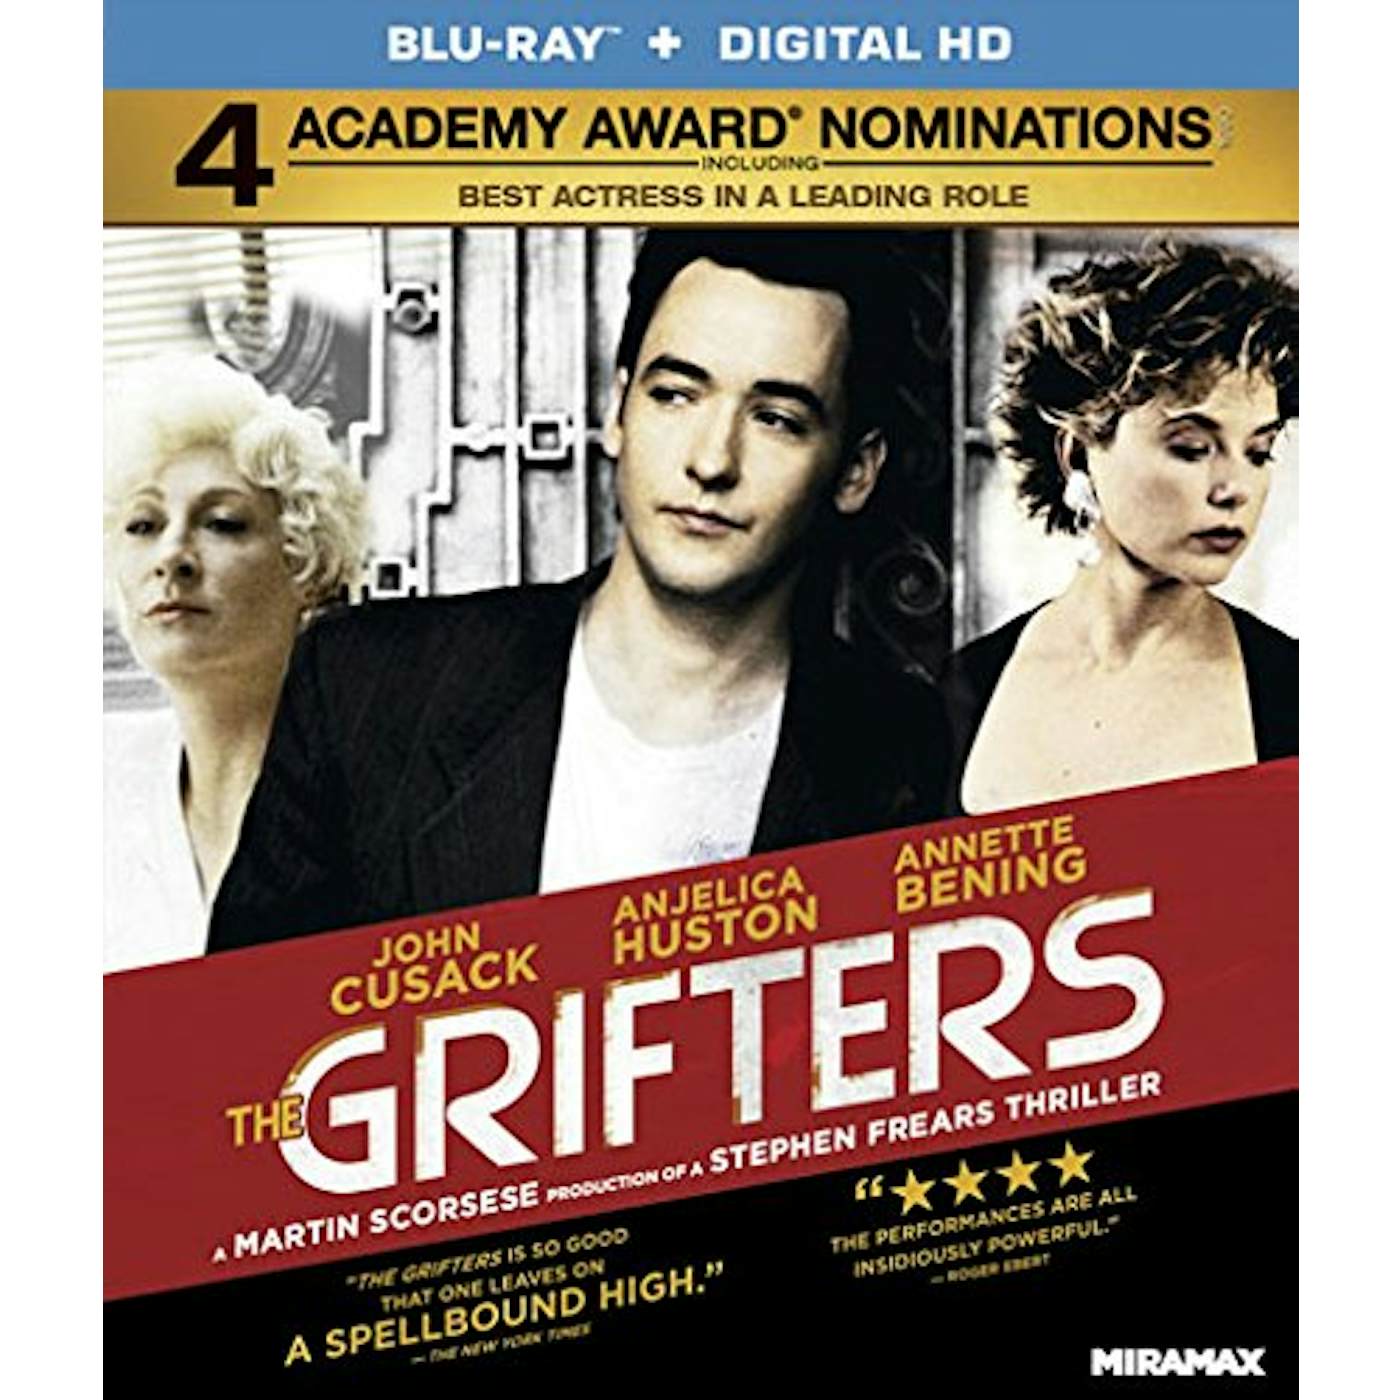 The Grifters Blu-ray